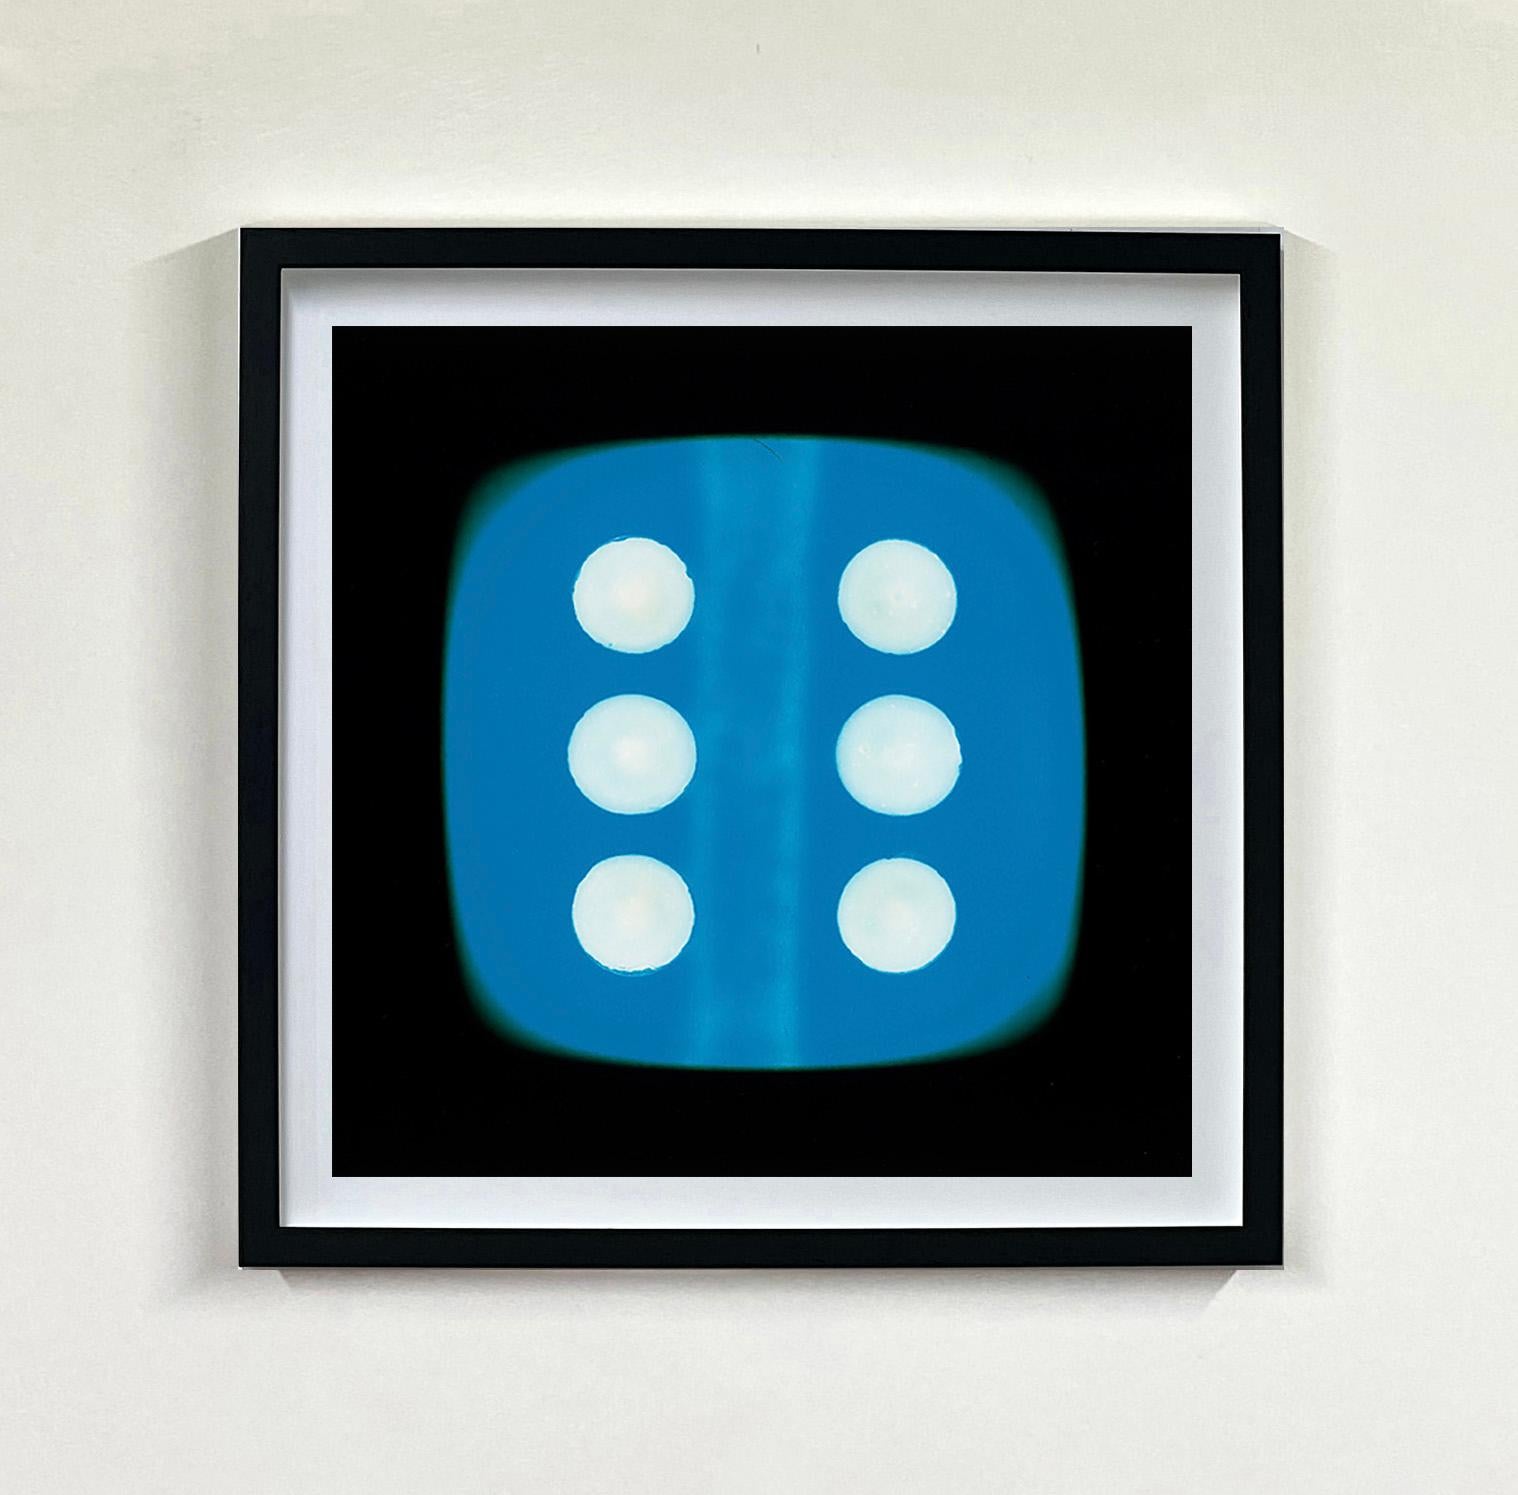 Heidler & Heeps Dice Series - Six Dice Blue.

Hypnotically curious in both content and technique, viewers find themselves pleasantly puzzled. Heidler & Heeps have developed their own dichromatic technique resulting in something, which is neither a